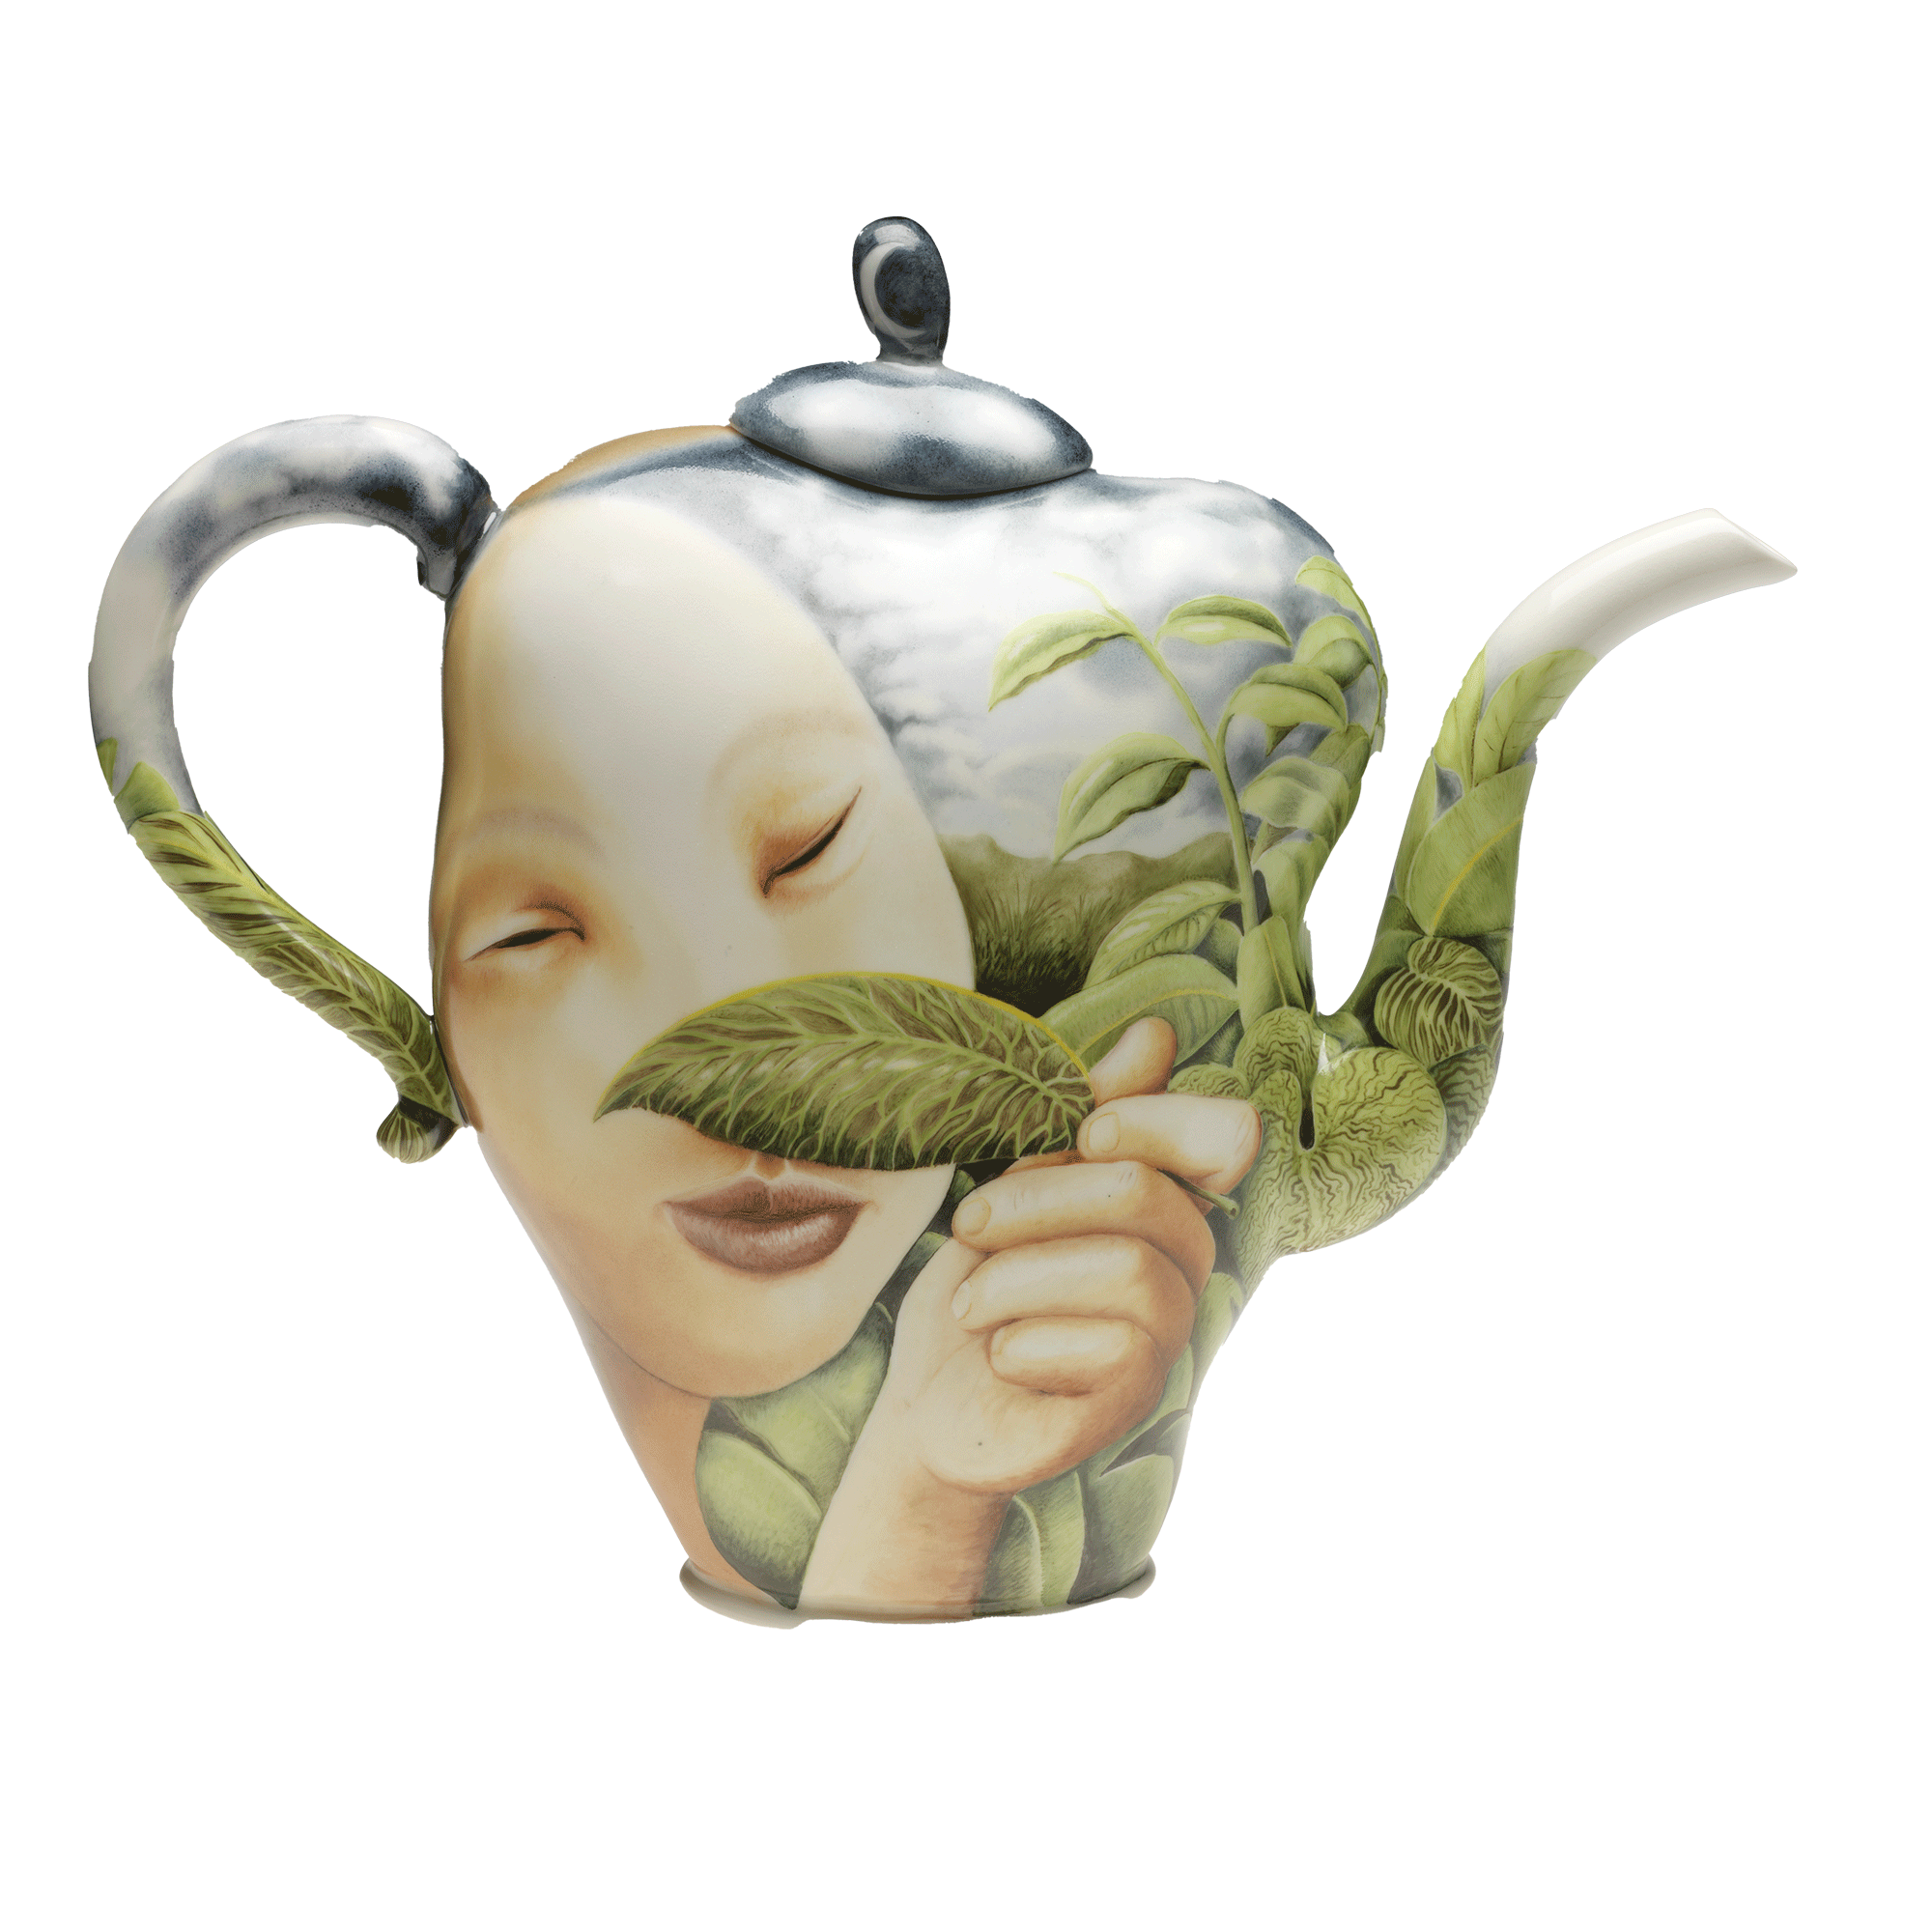 /Teapot%20with%20spout%20facing%20right.%20It%20is%20painted%20with%20a%20large%2C%20light-skinned%20face%20and%20hand%20holding%20a%20green%20leaf%20partially%20over%20face%2C%20surrounded%20by%20tropical%20green%20leaves%20and%20cloudy%20blue%20sky